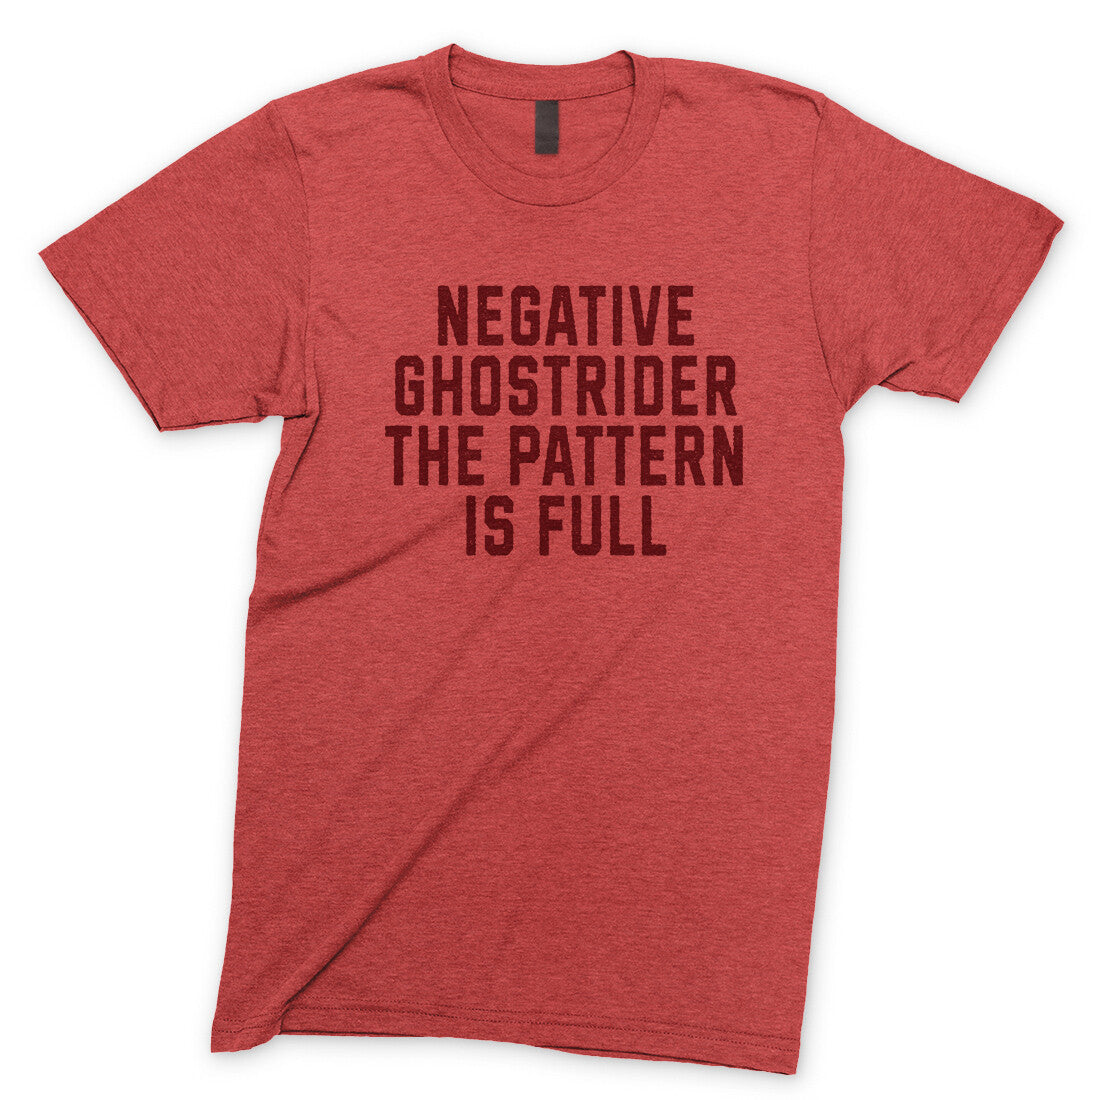 Negative Ghostrider the Pattern is Full in Heather Red Color